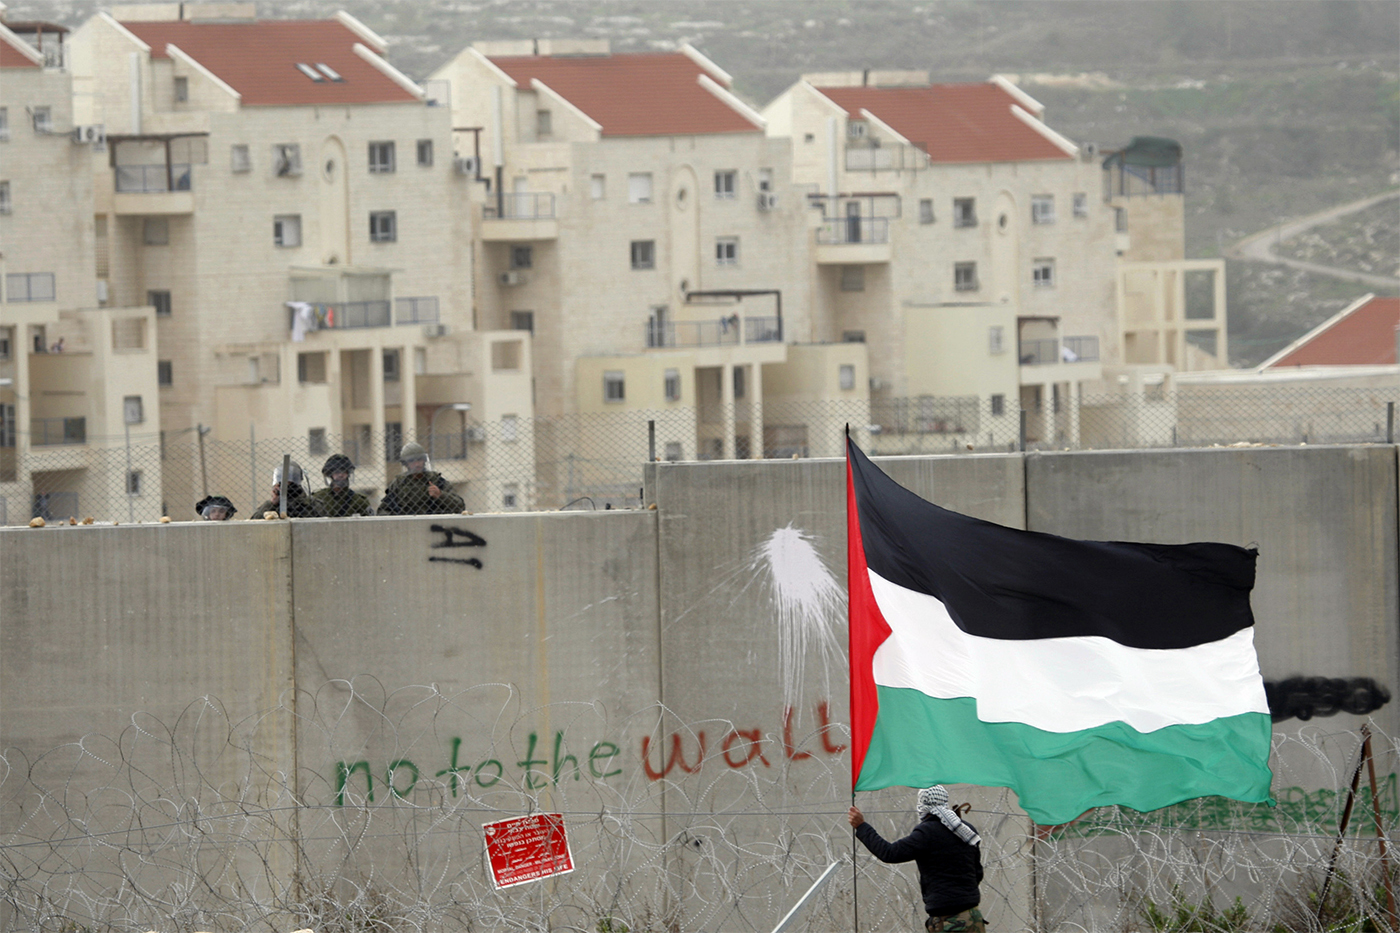 A protestor waving a Palestinian flag in front of Israeli troops on the other side of a wall in Modiin Illit. 